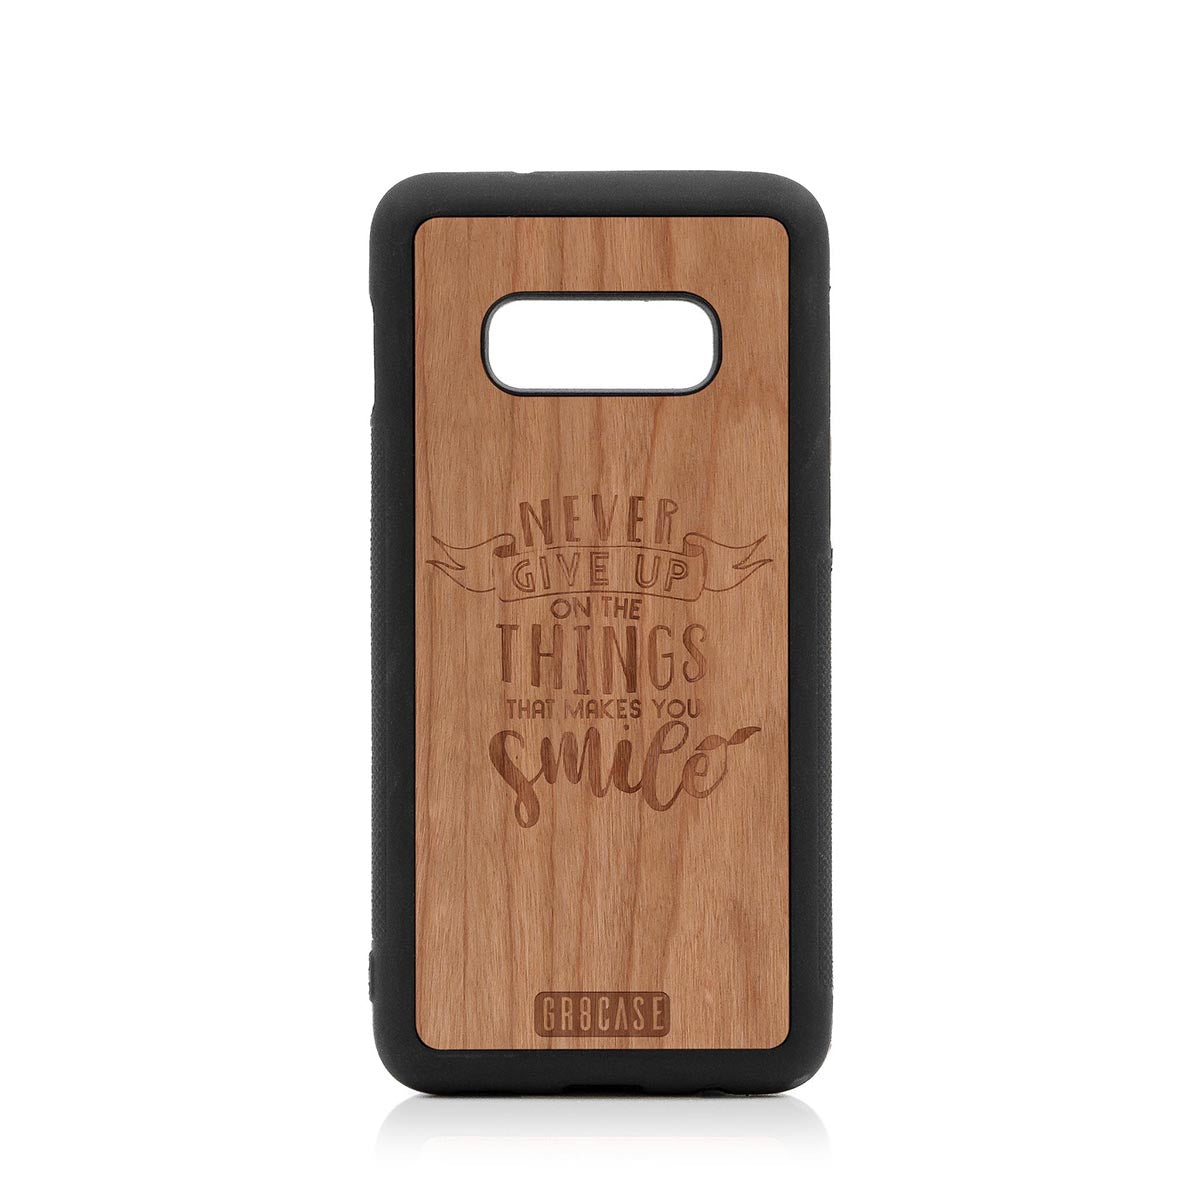 Never Give Up On The Things That Makes You Smile Design Wood Case Samsung Galaxy S10E by GR8CASE